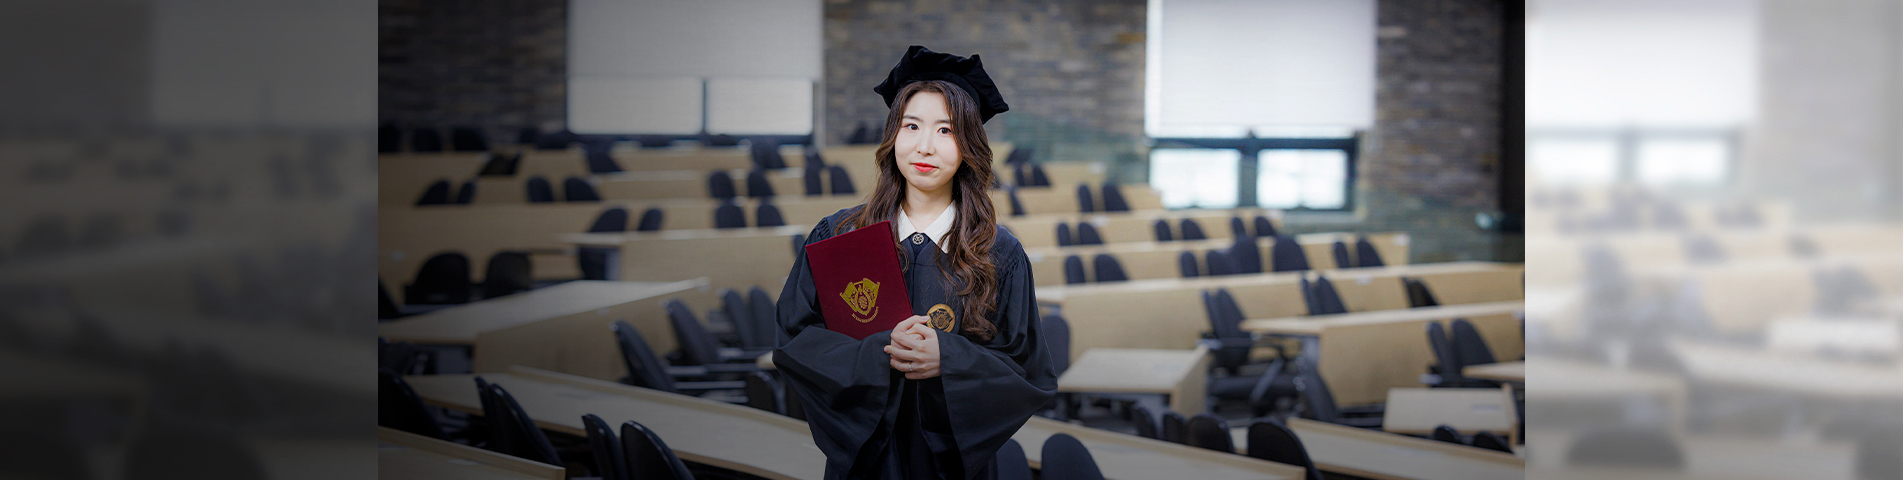 Student Min-ji Kang Passed the National Licensing Exam for Doctor of Korean Medicine at the Top of Her Class